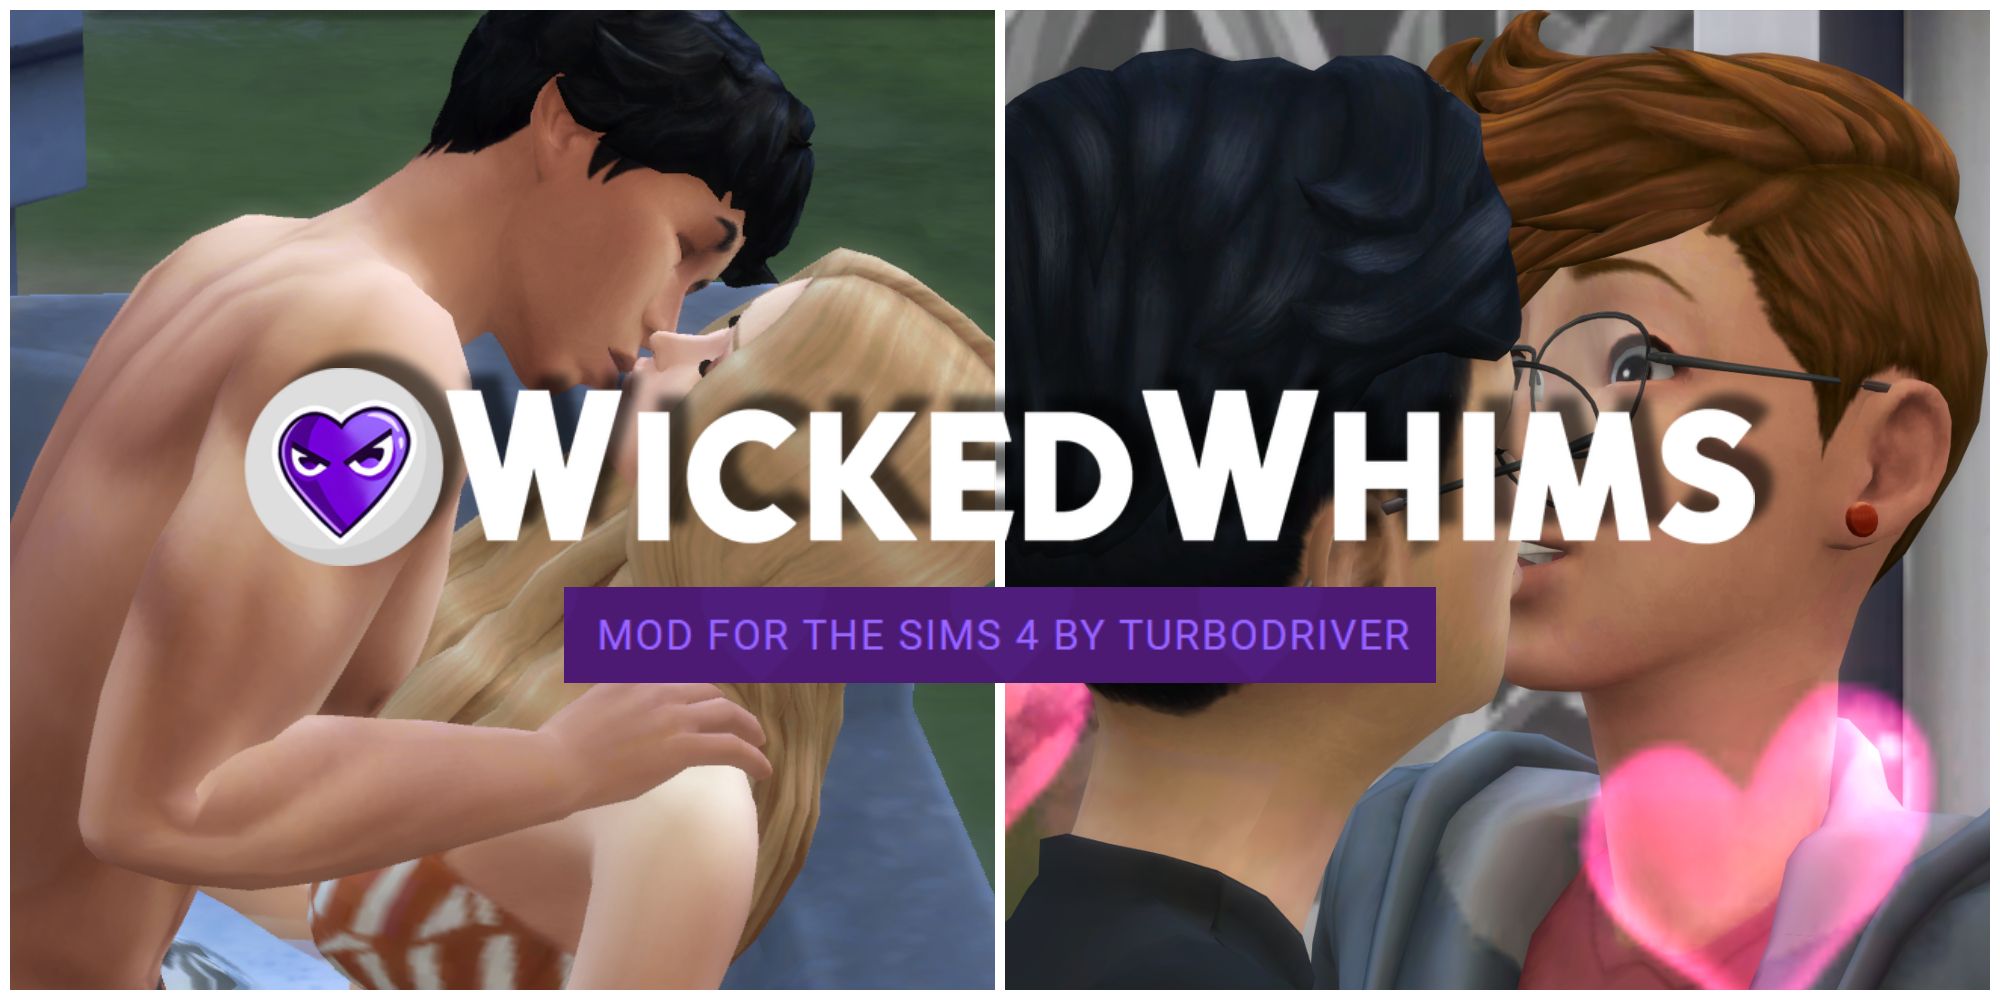 Two Sims couples are kissing behind the logo for the Wicked Whims mod